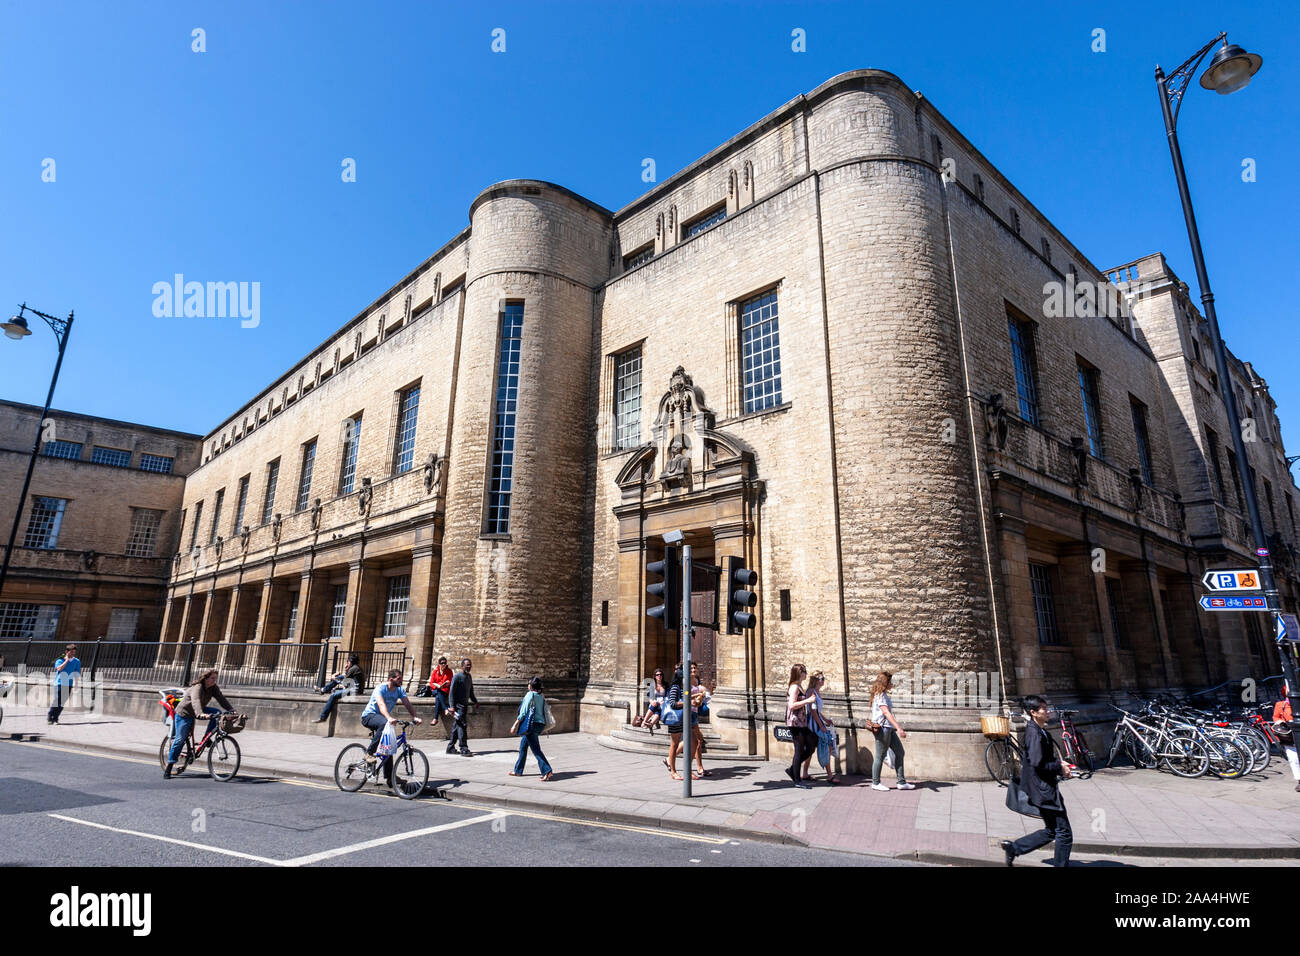 Weston Library is part of the Bodleian Library, the main research library of the University of Oxford, Oxfordshire, England, UK Stock Photo